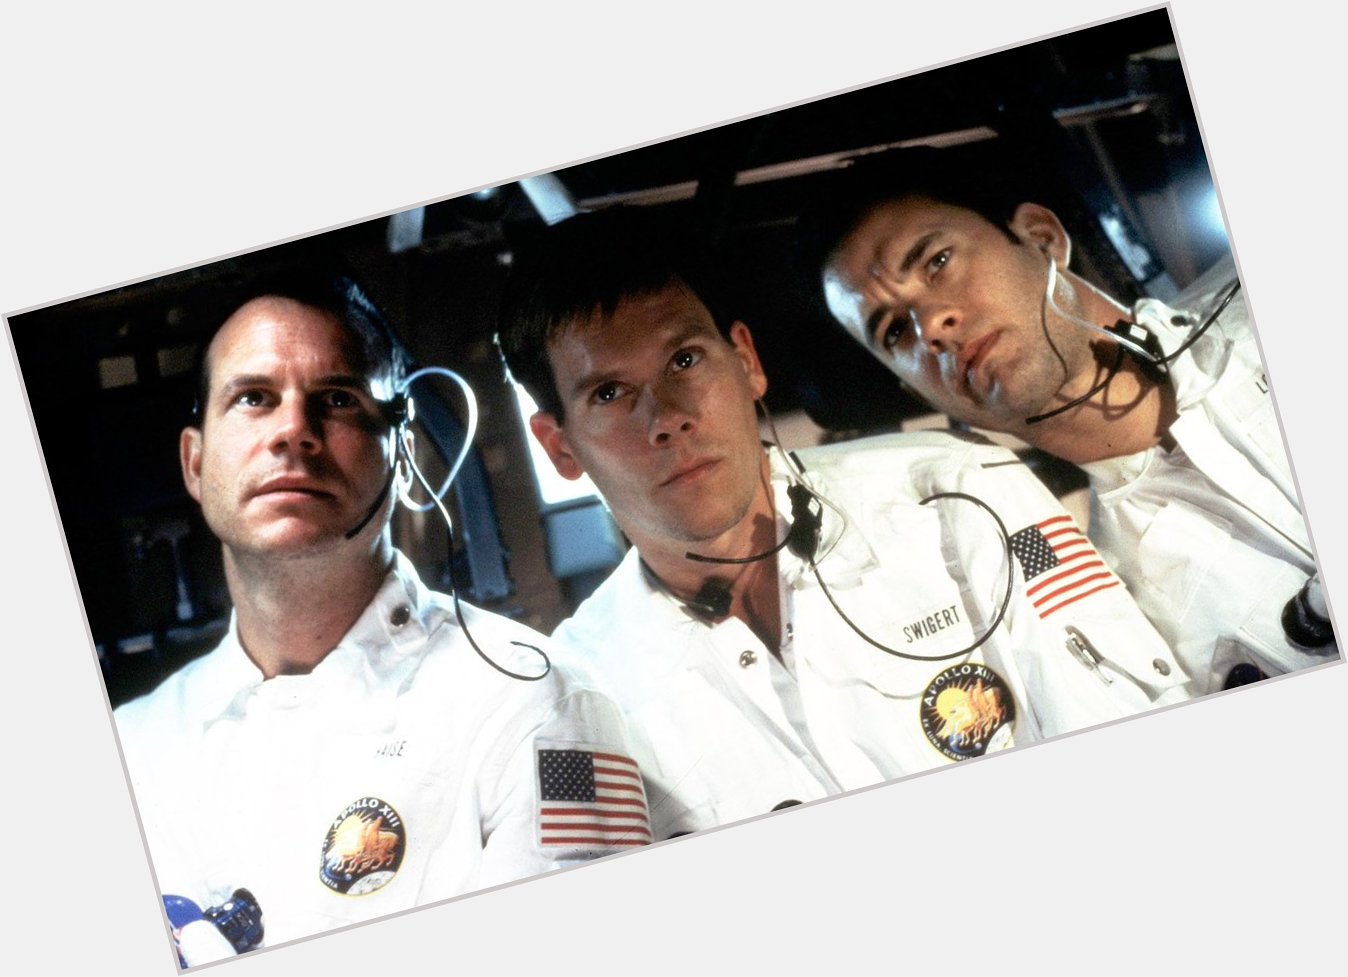 Happy Birthday to Kevin Bacon(middle), who turns 59 today! 